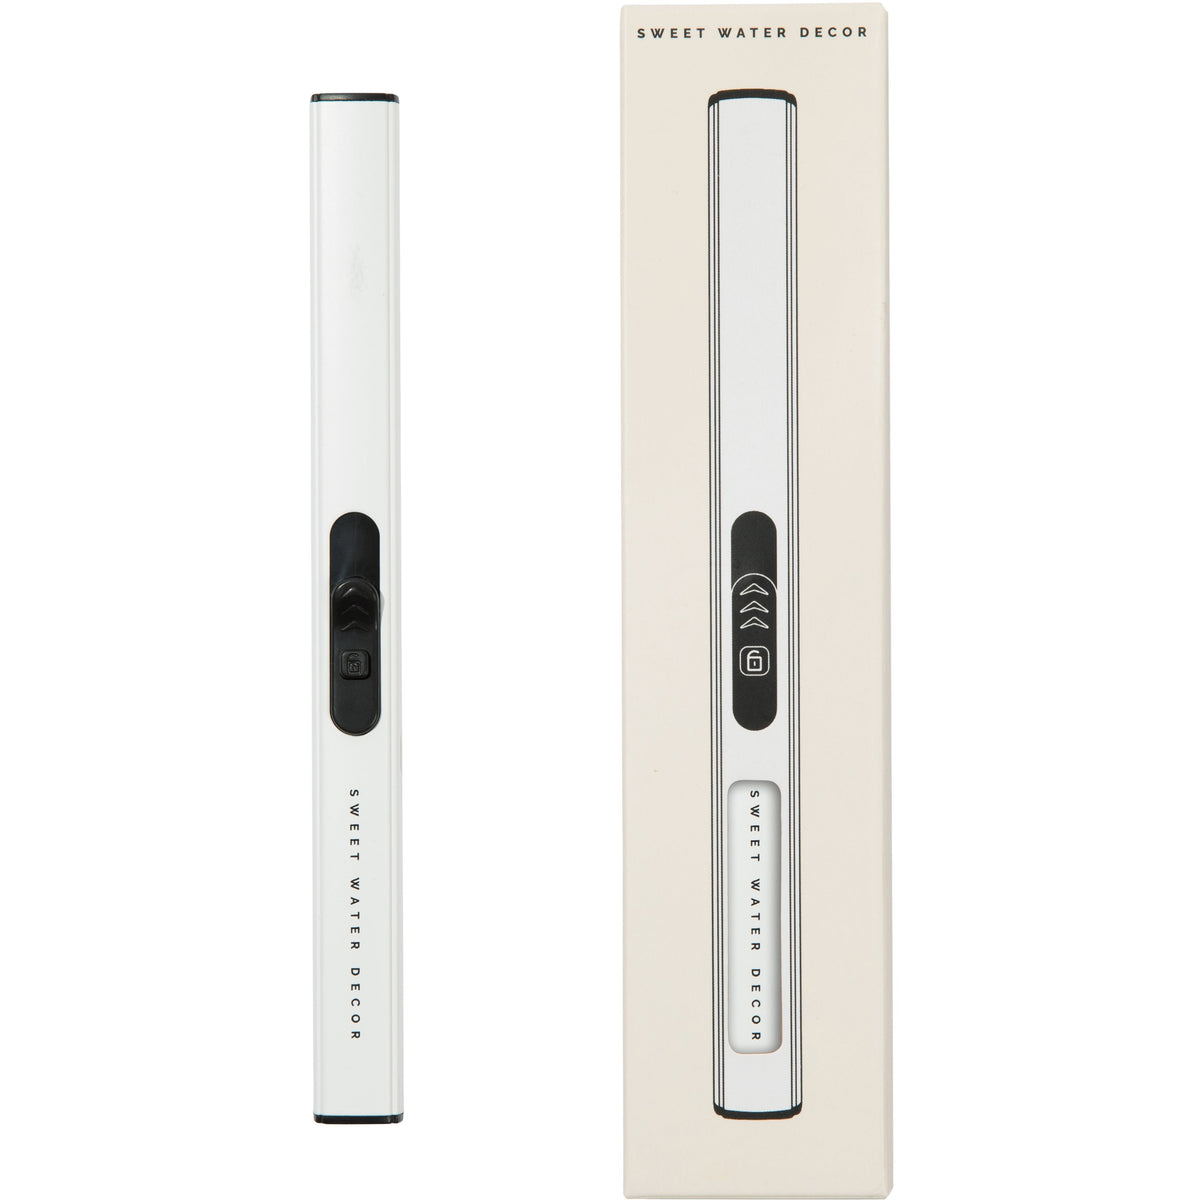 echargeable lighter boasts a sleek and modern appearance, while also prioritizing eco-friendliness. Its ultra-thin profile and clean white finish